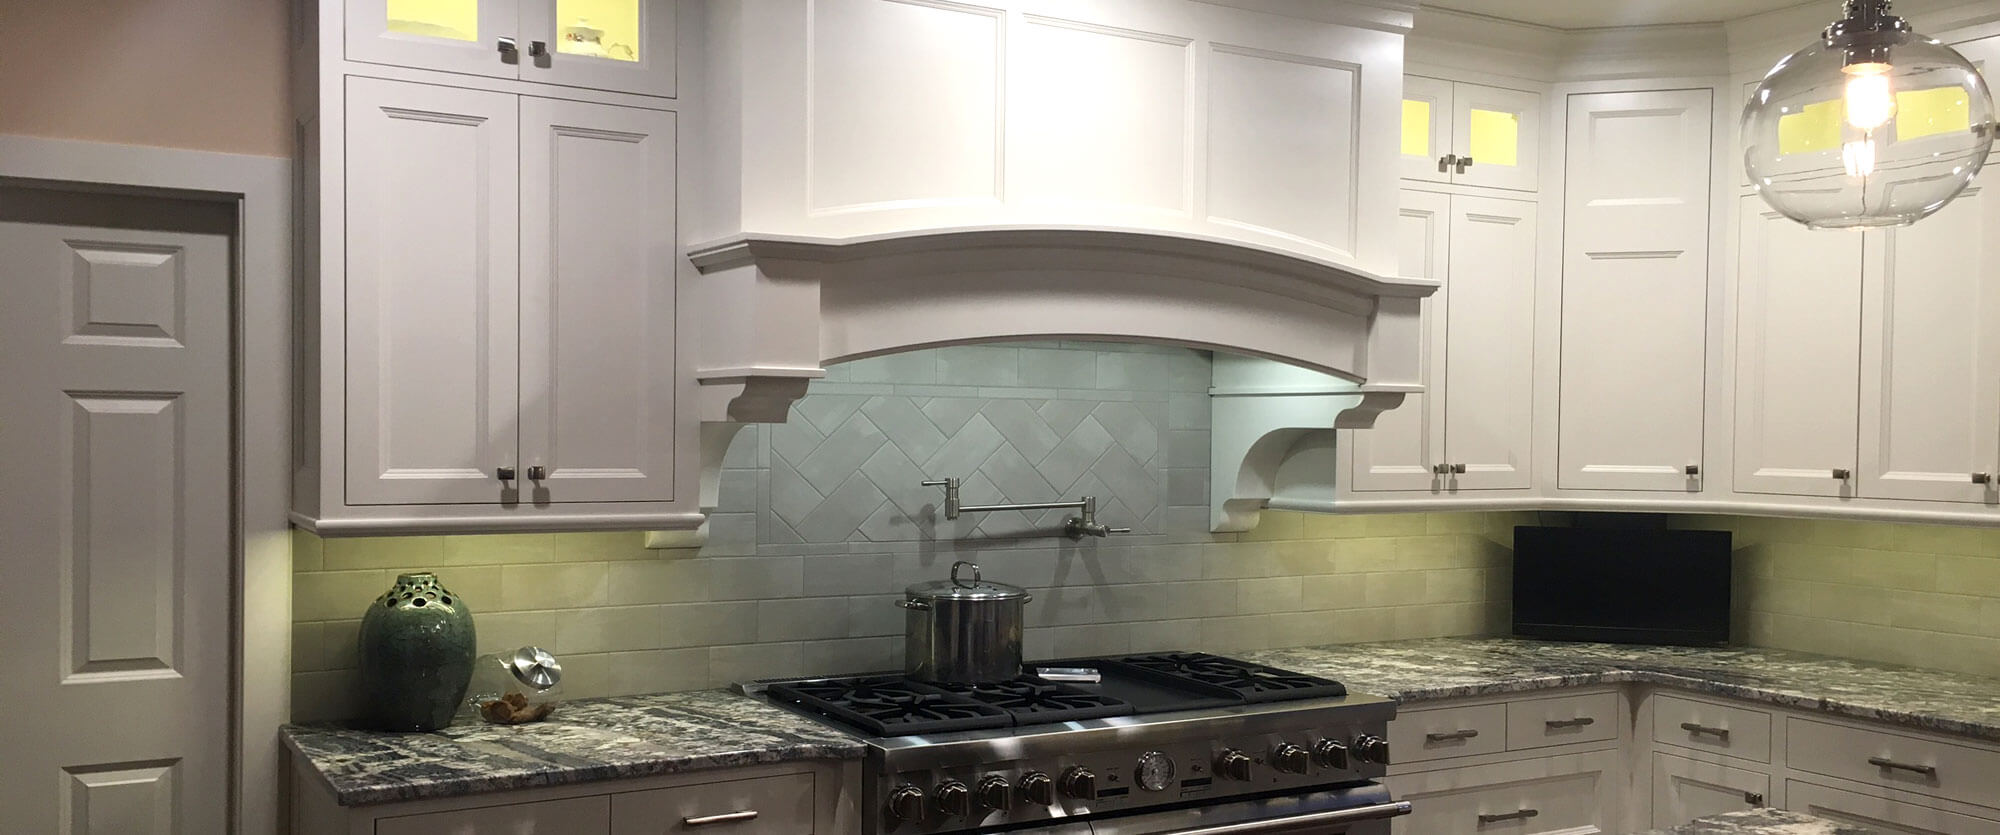 Custom kitchen cabinets made of solid wood and painted white featuring a curved range hood and lighted upper doors; designed, built, and installed by finewood Structures of Browerville, MN